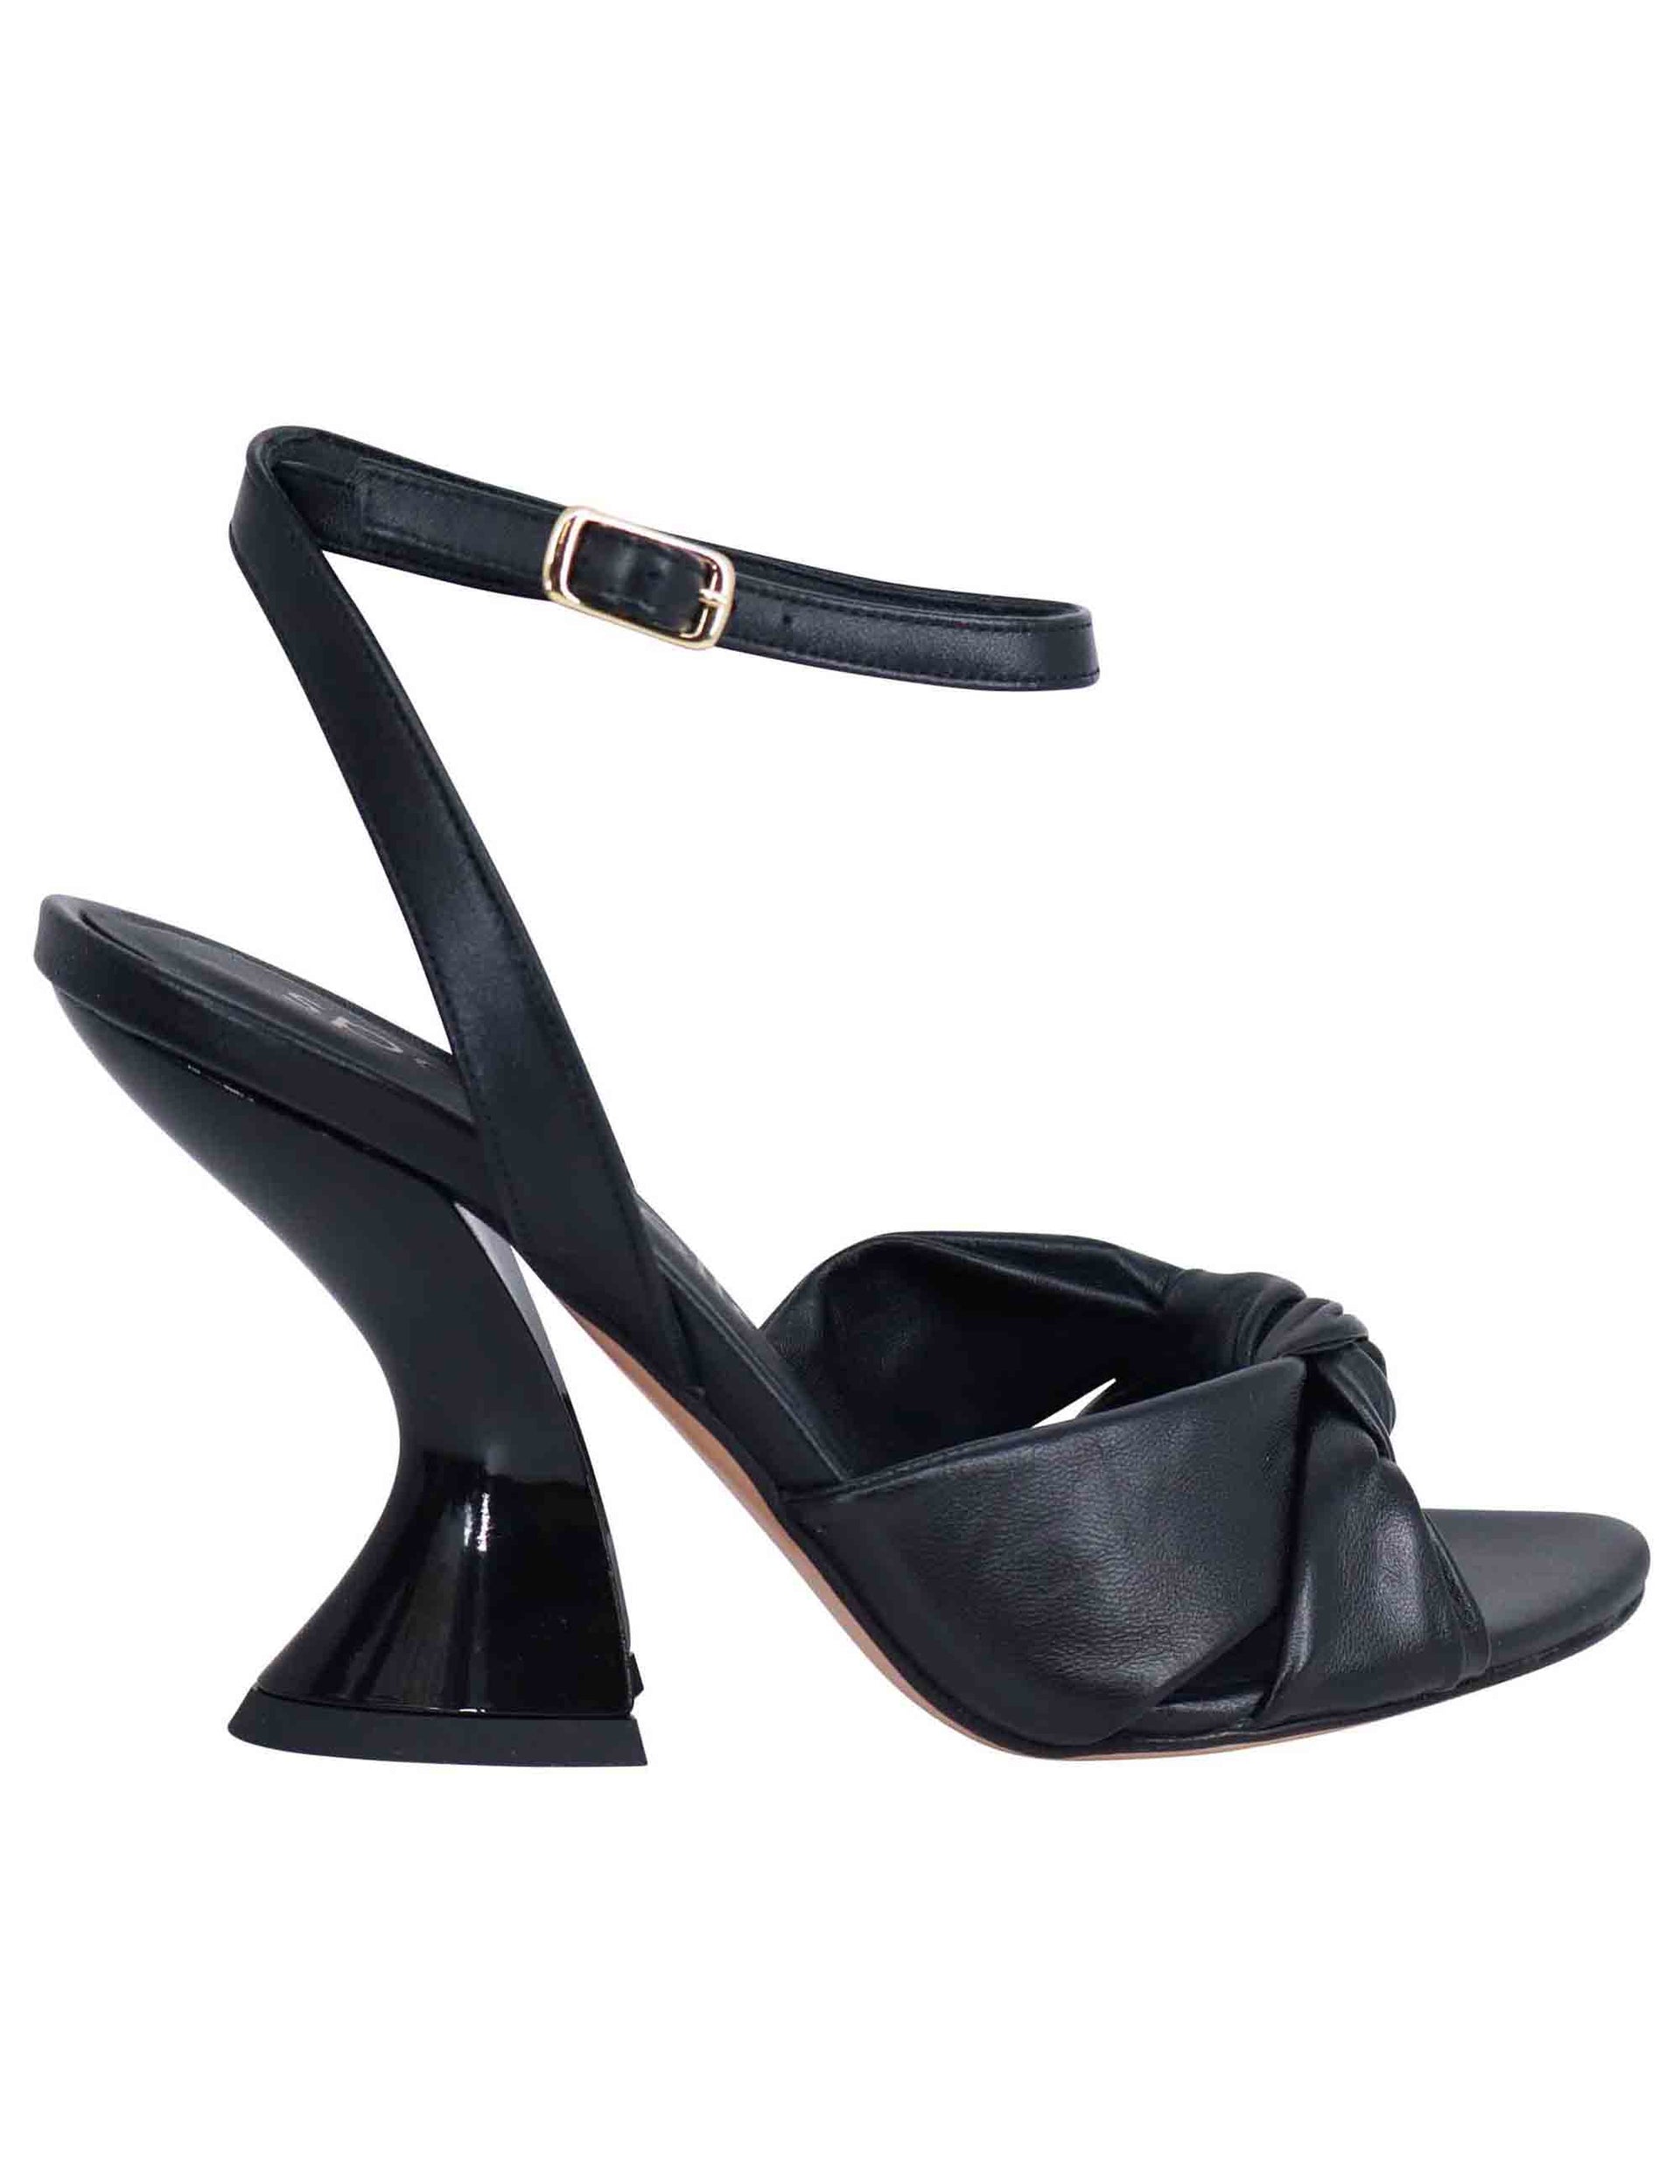 Women's black leather sandals with high heel and ankle strap